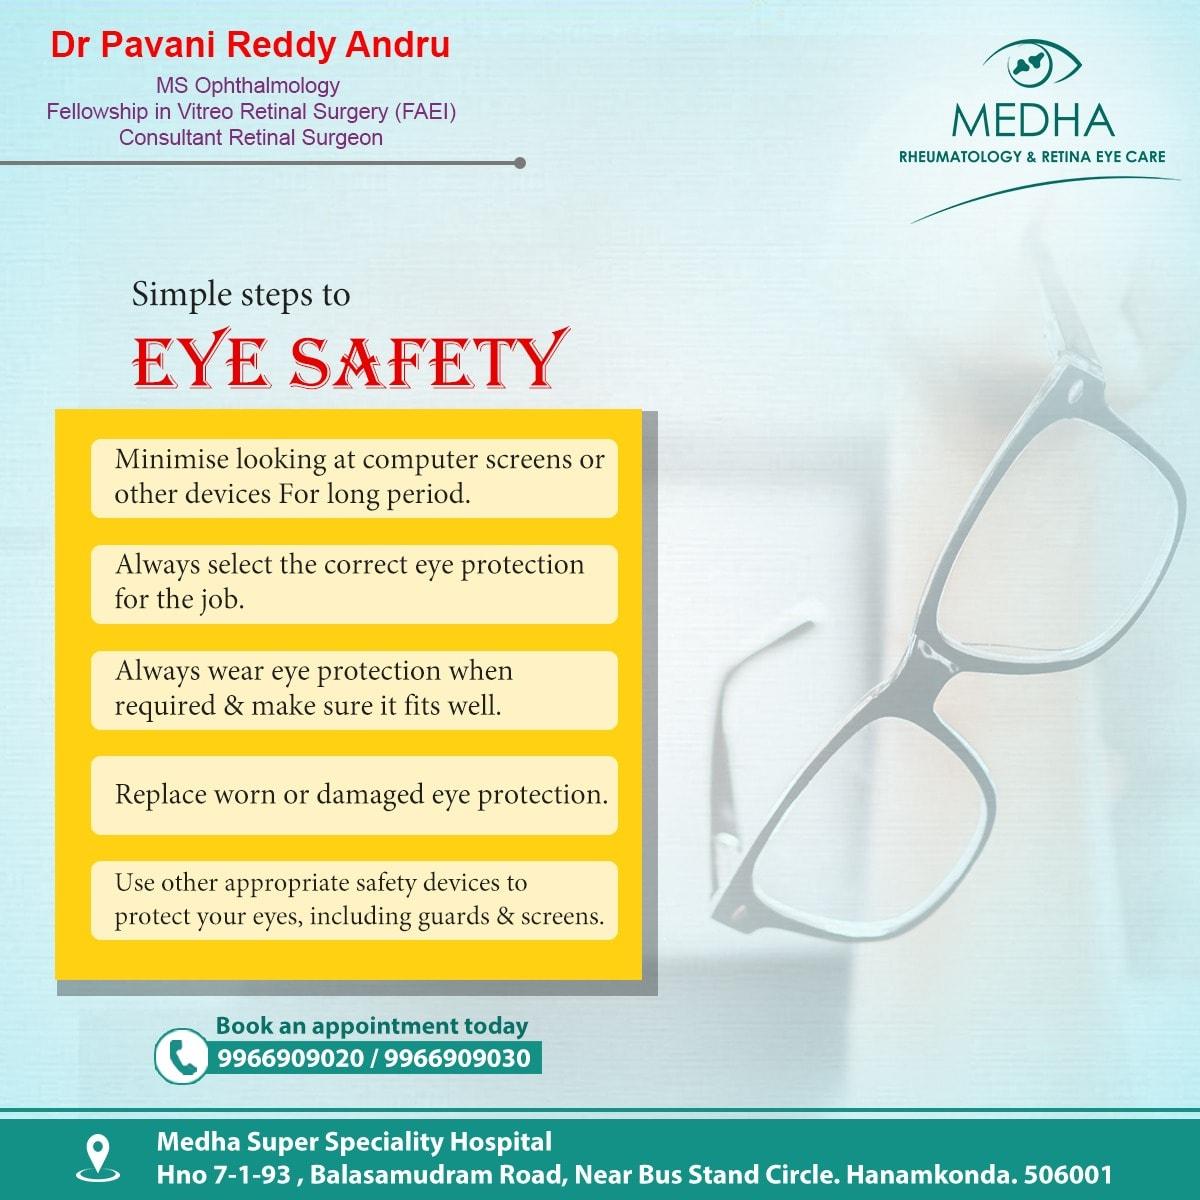 Simple Steps to EYE SAFETY